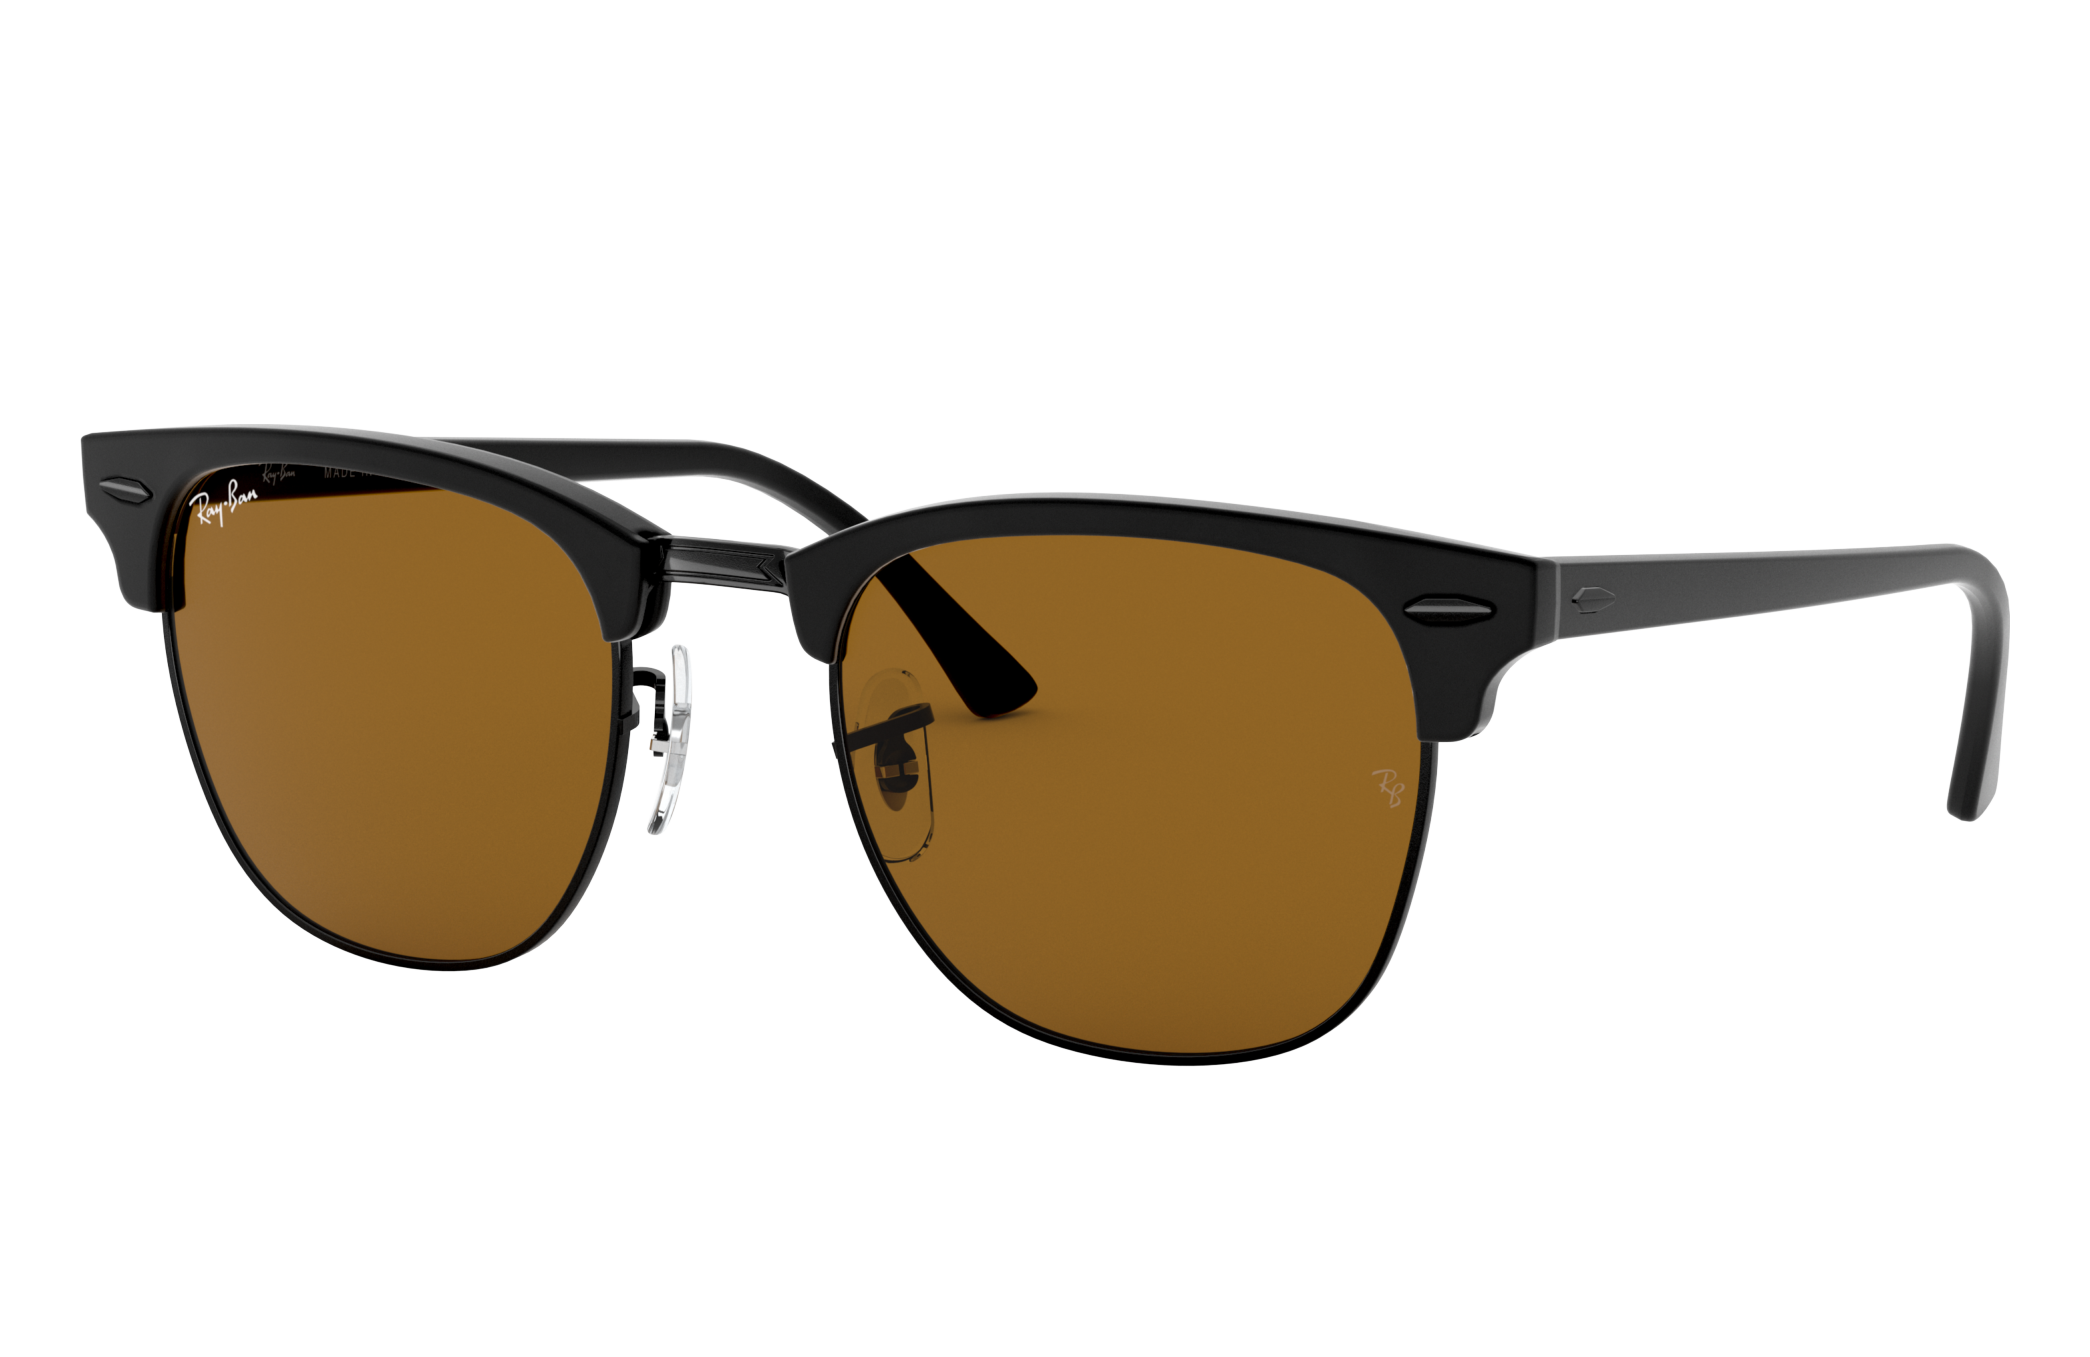 Check out the Clubmaster Classic at ray-ban.com